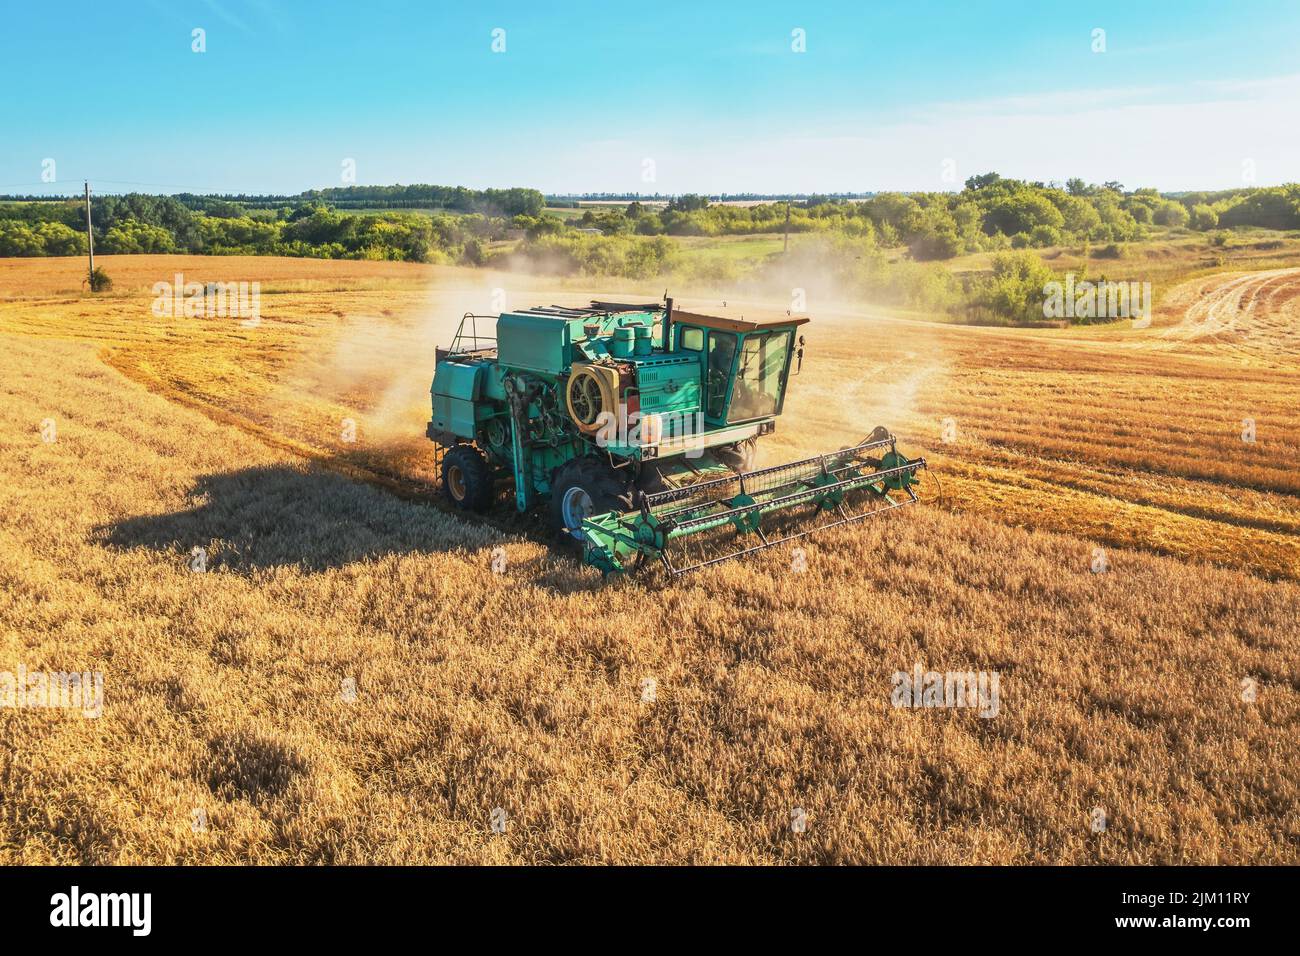 Combine harvester harvests ripe wheat aerial view. Agriculture field and farming concept. Stock Photo